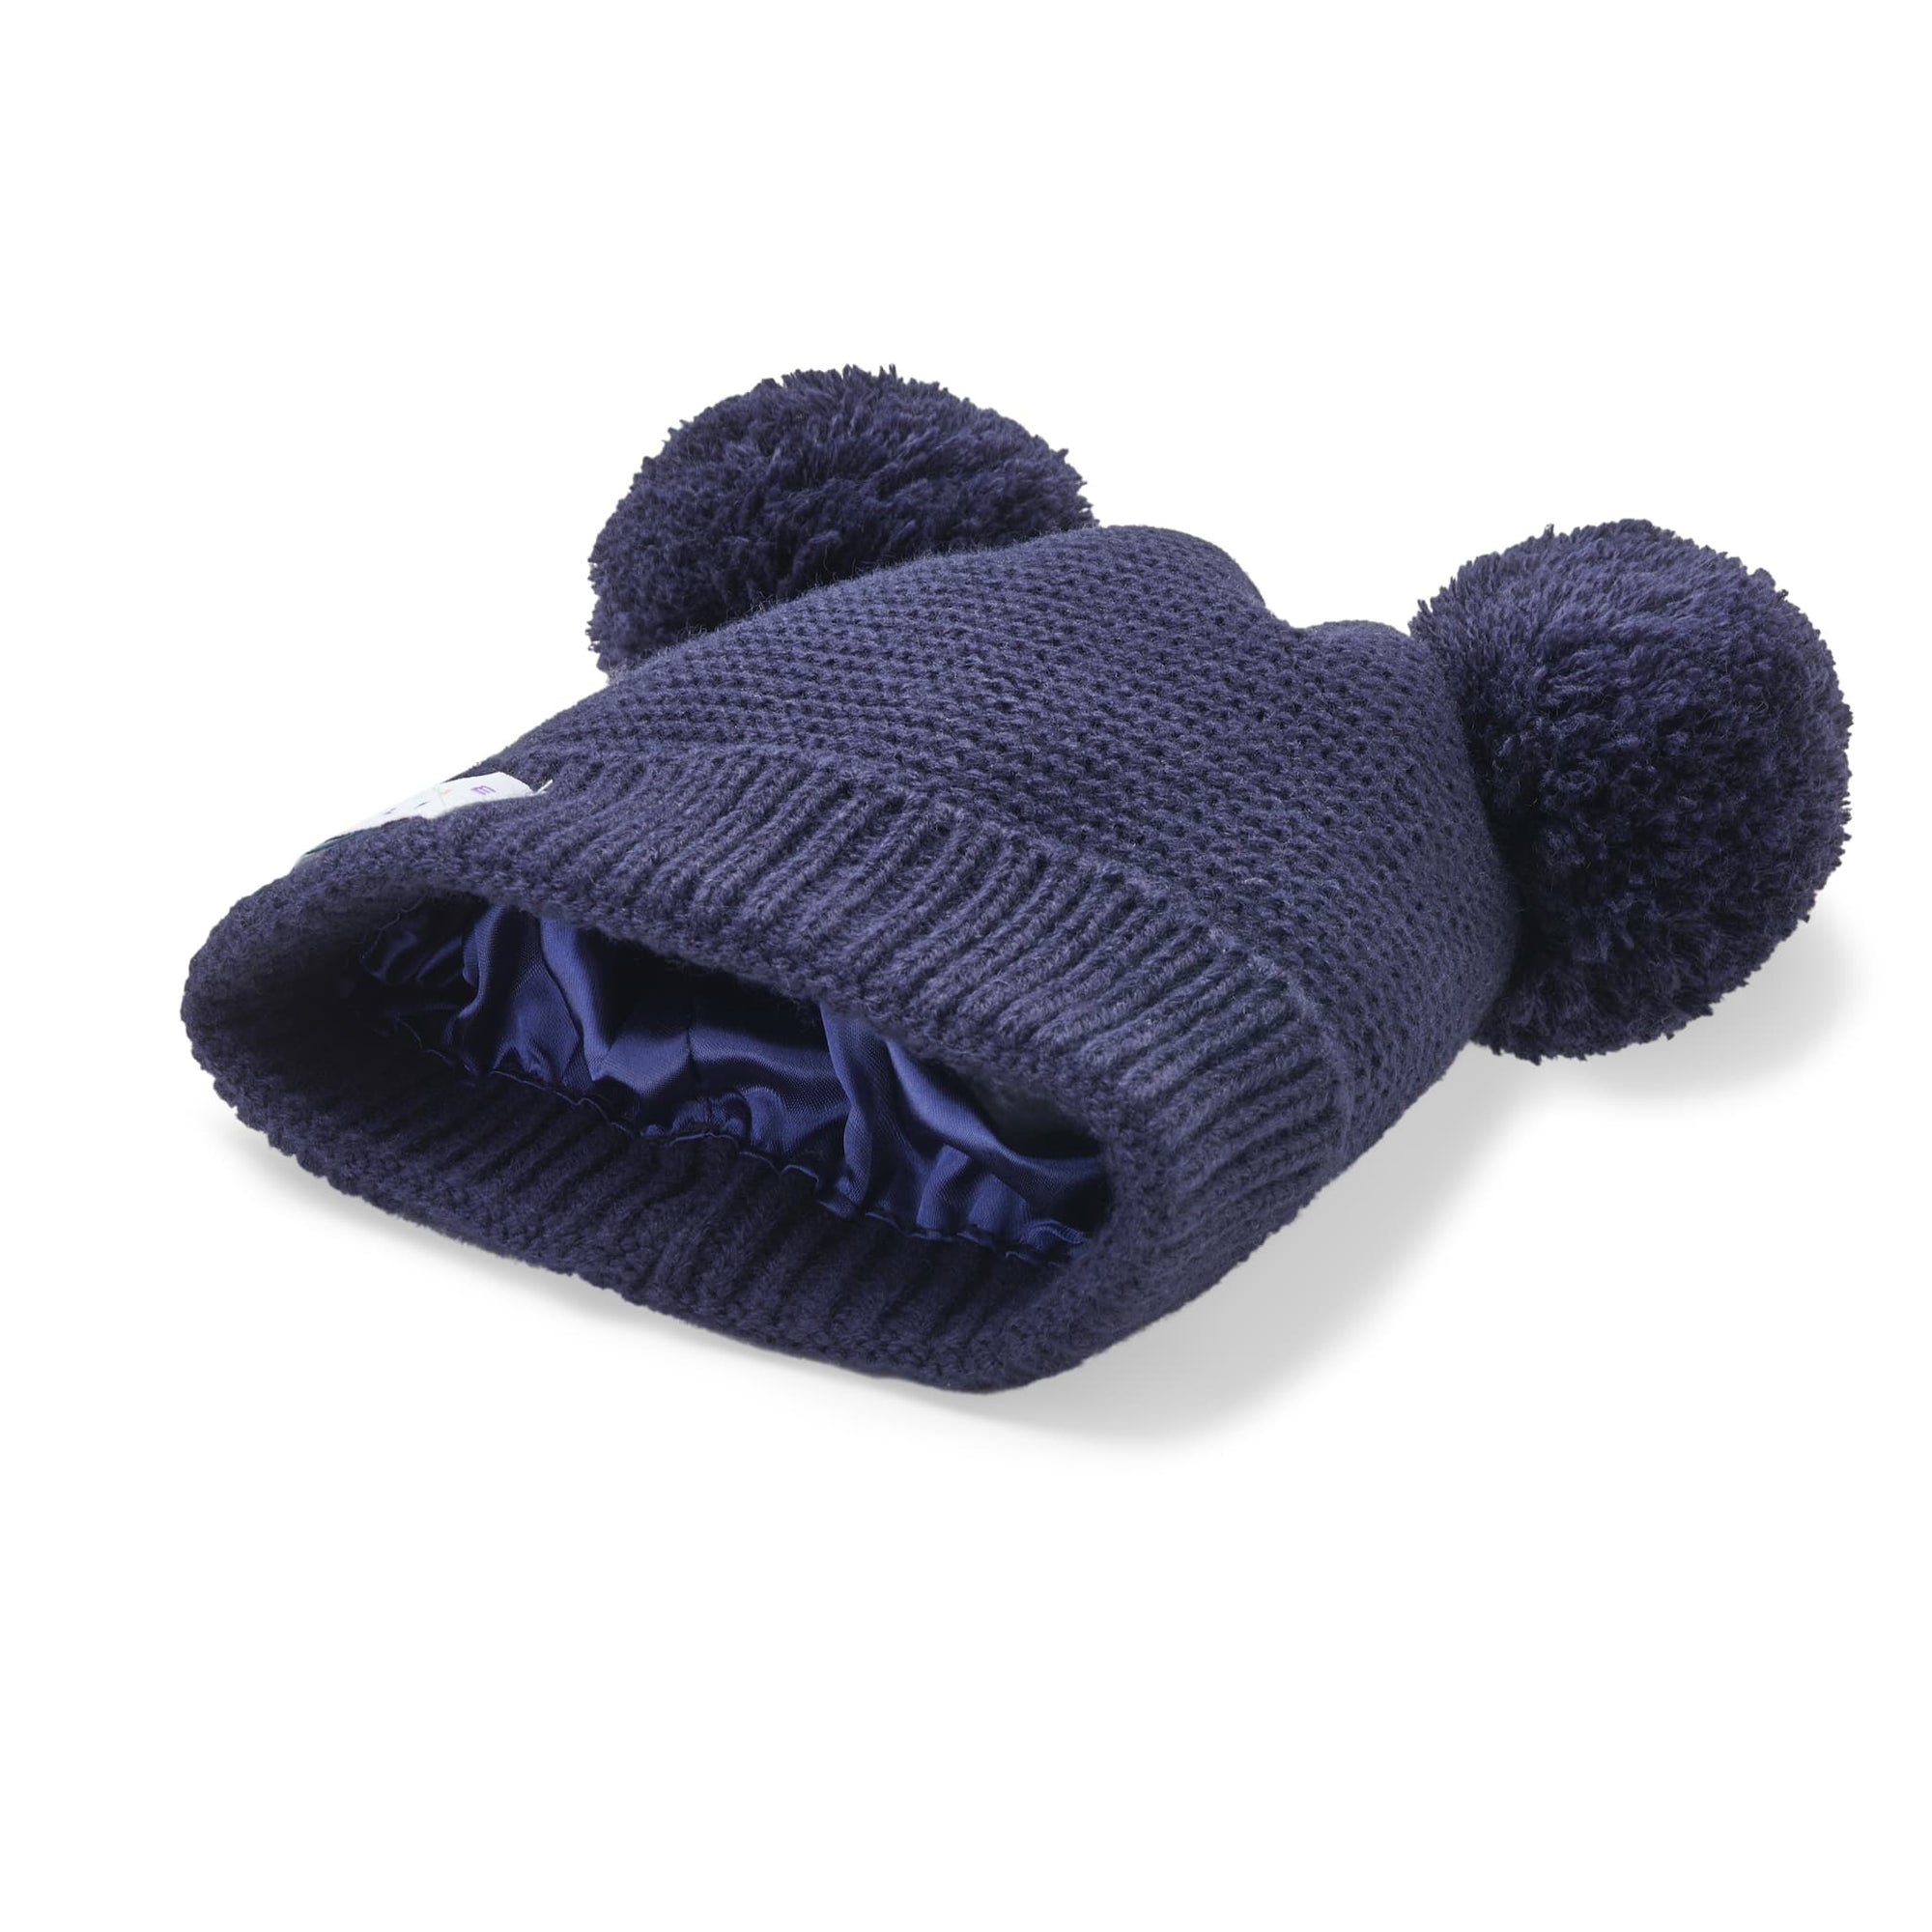 Little Curls Satin Lined Double Pom Beanie Hat - Navy - Only Curls